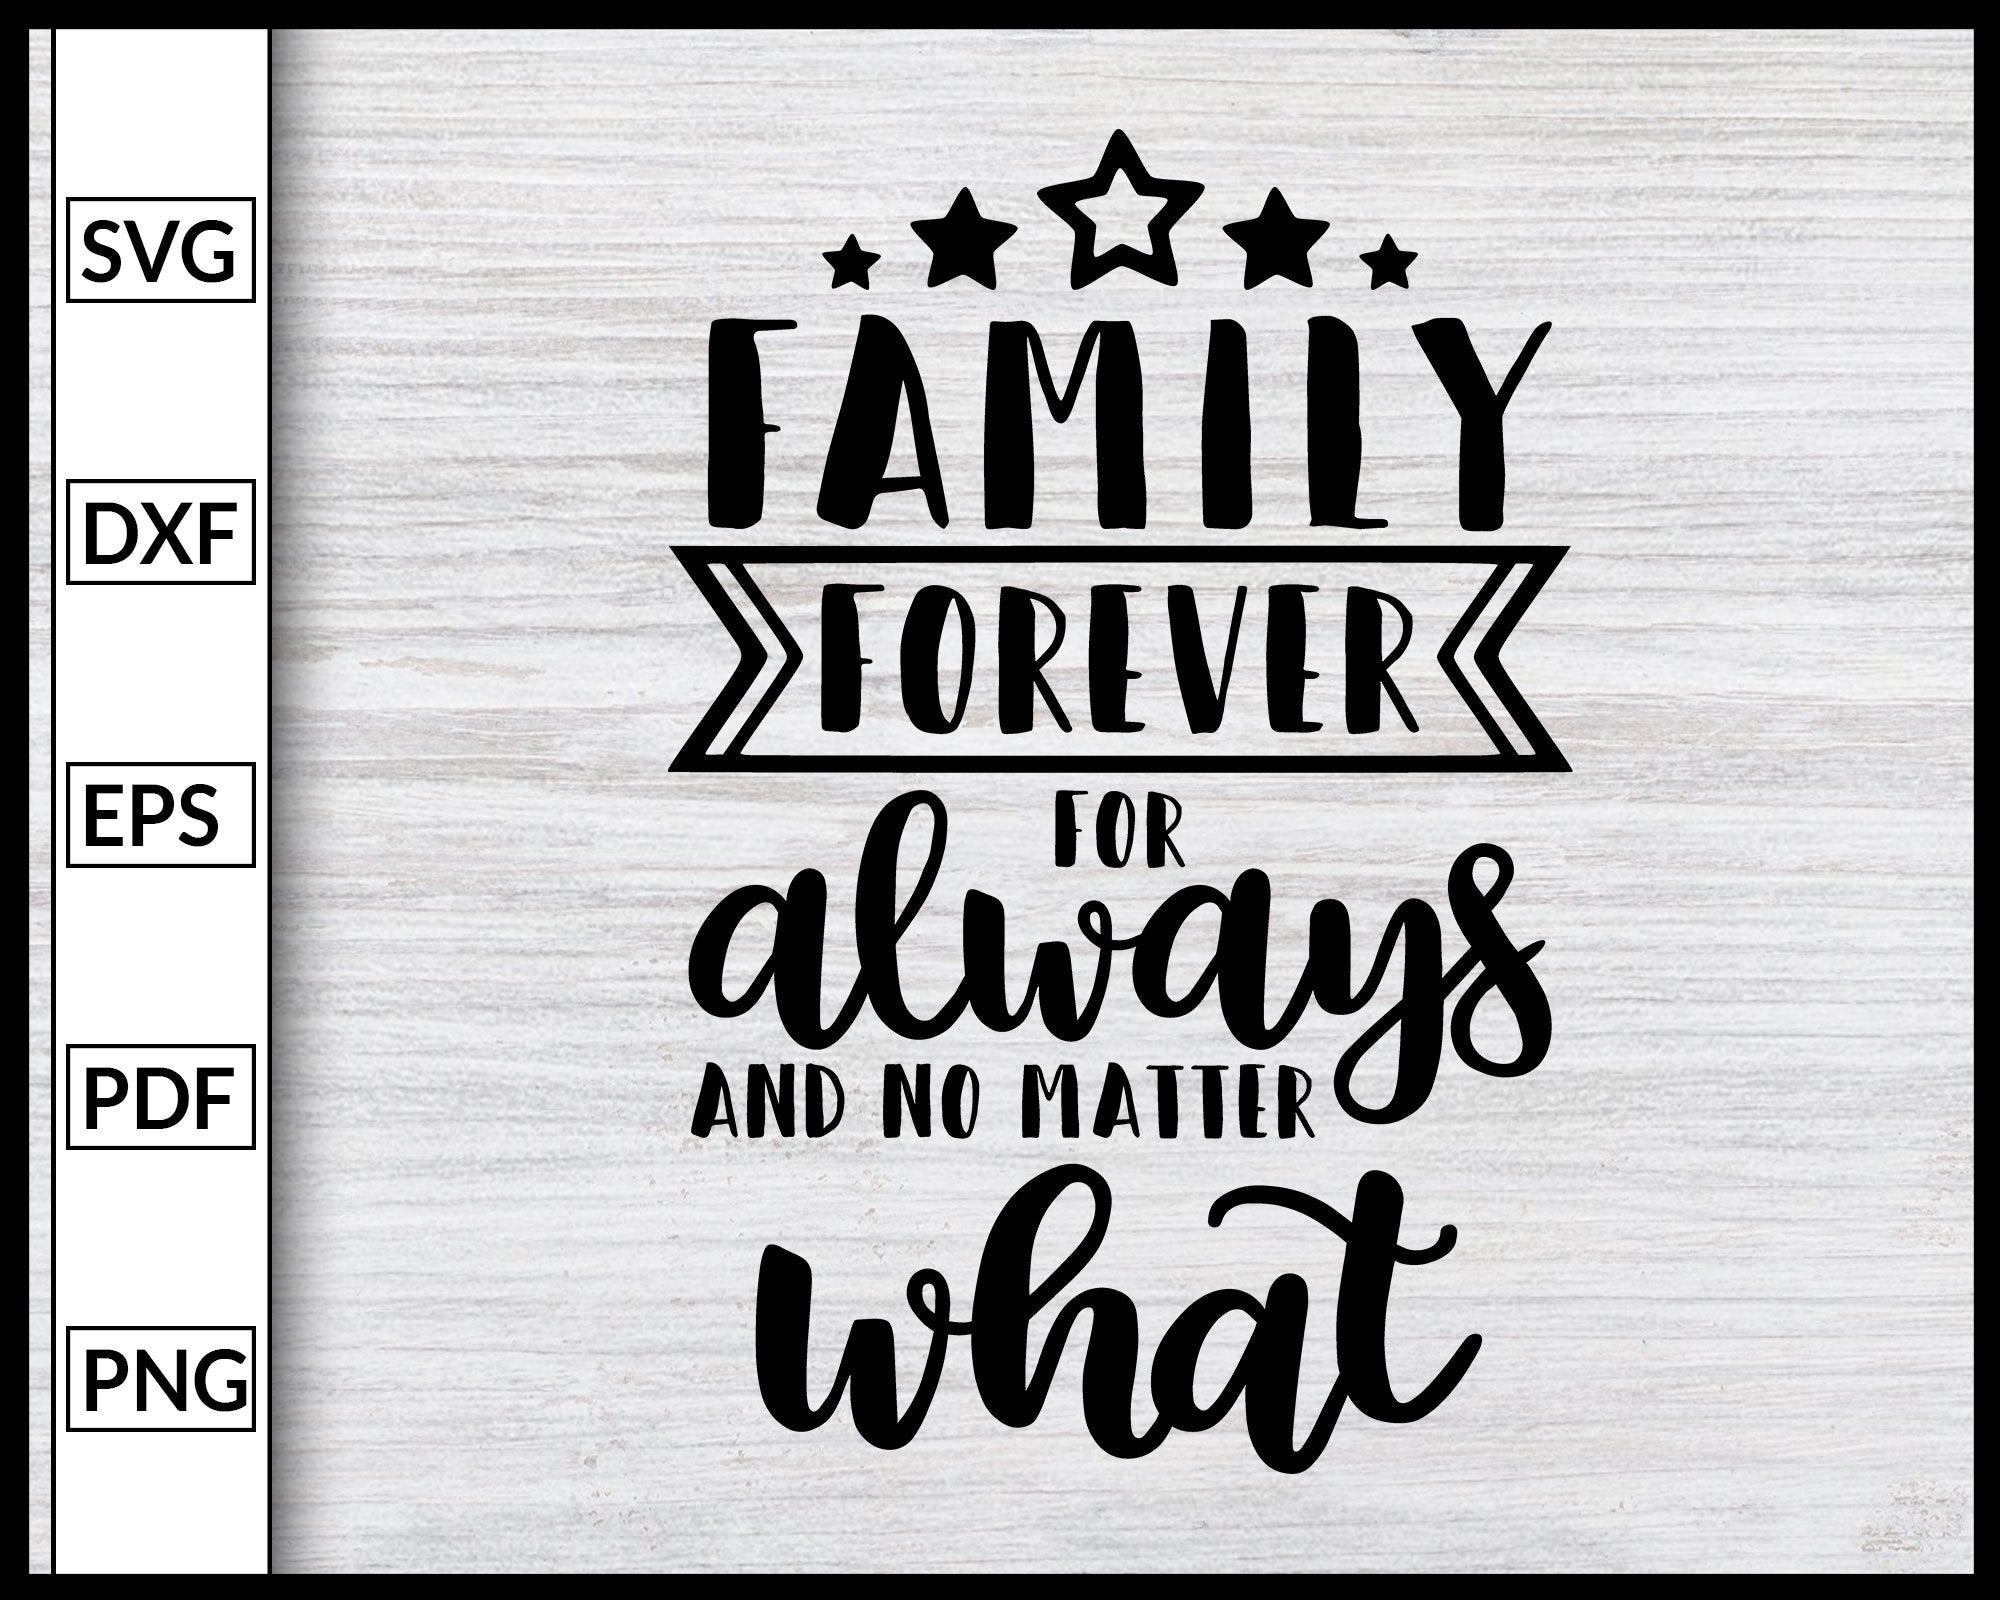 Download Family Forever Svg Inspirational Quotes Svg Family Quotes Svg Cut File Editable Svg File